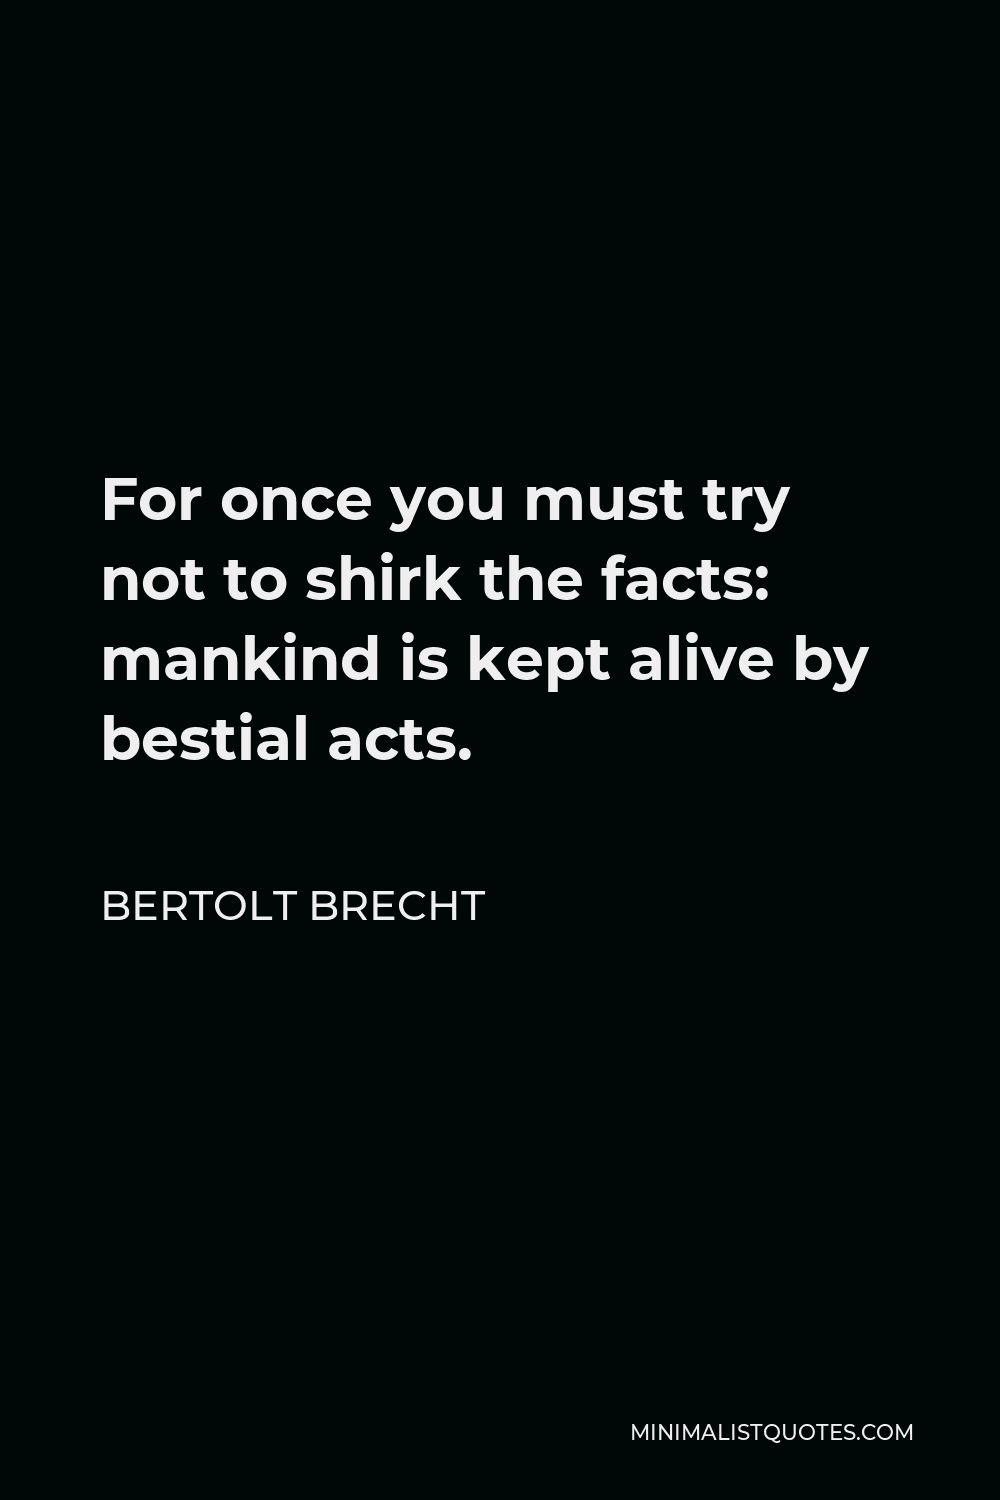 Bertolt Brecht Quote - For once you must try not to shirk the facts: mankind is kept alive by bestial acts.